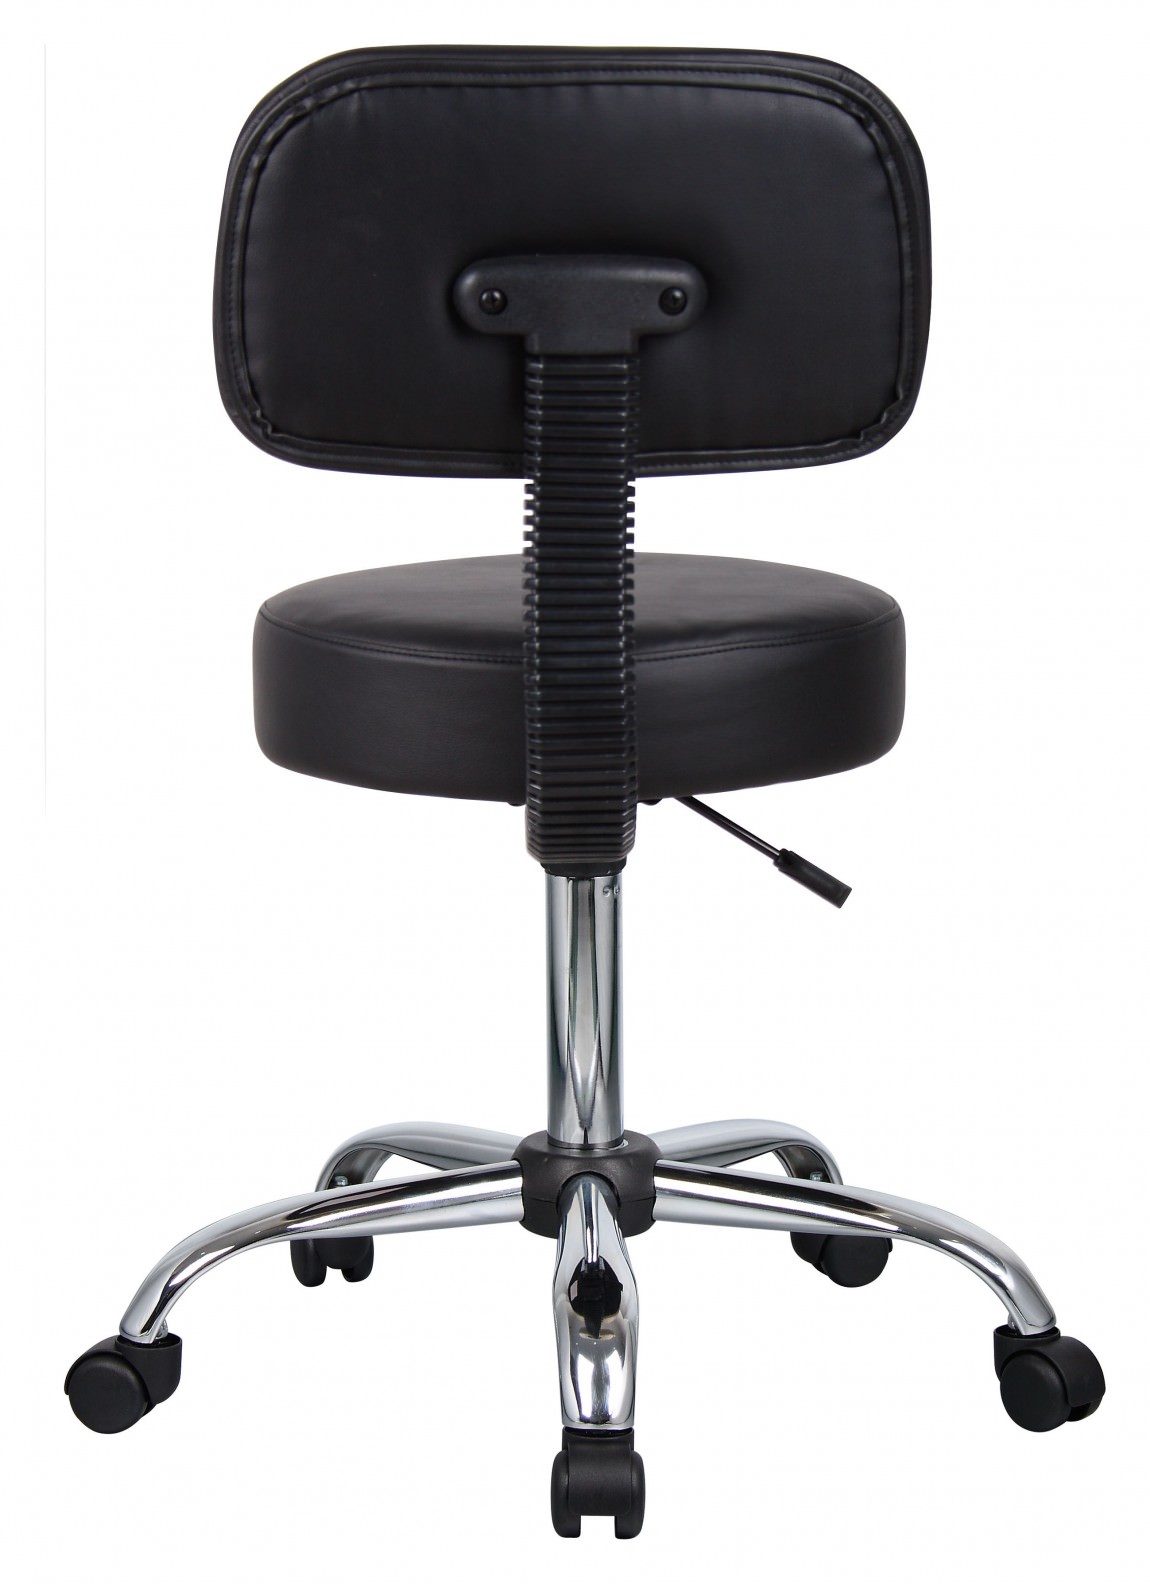 Medical Stool with Back